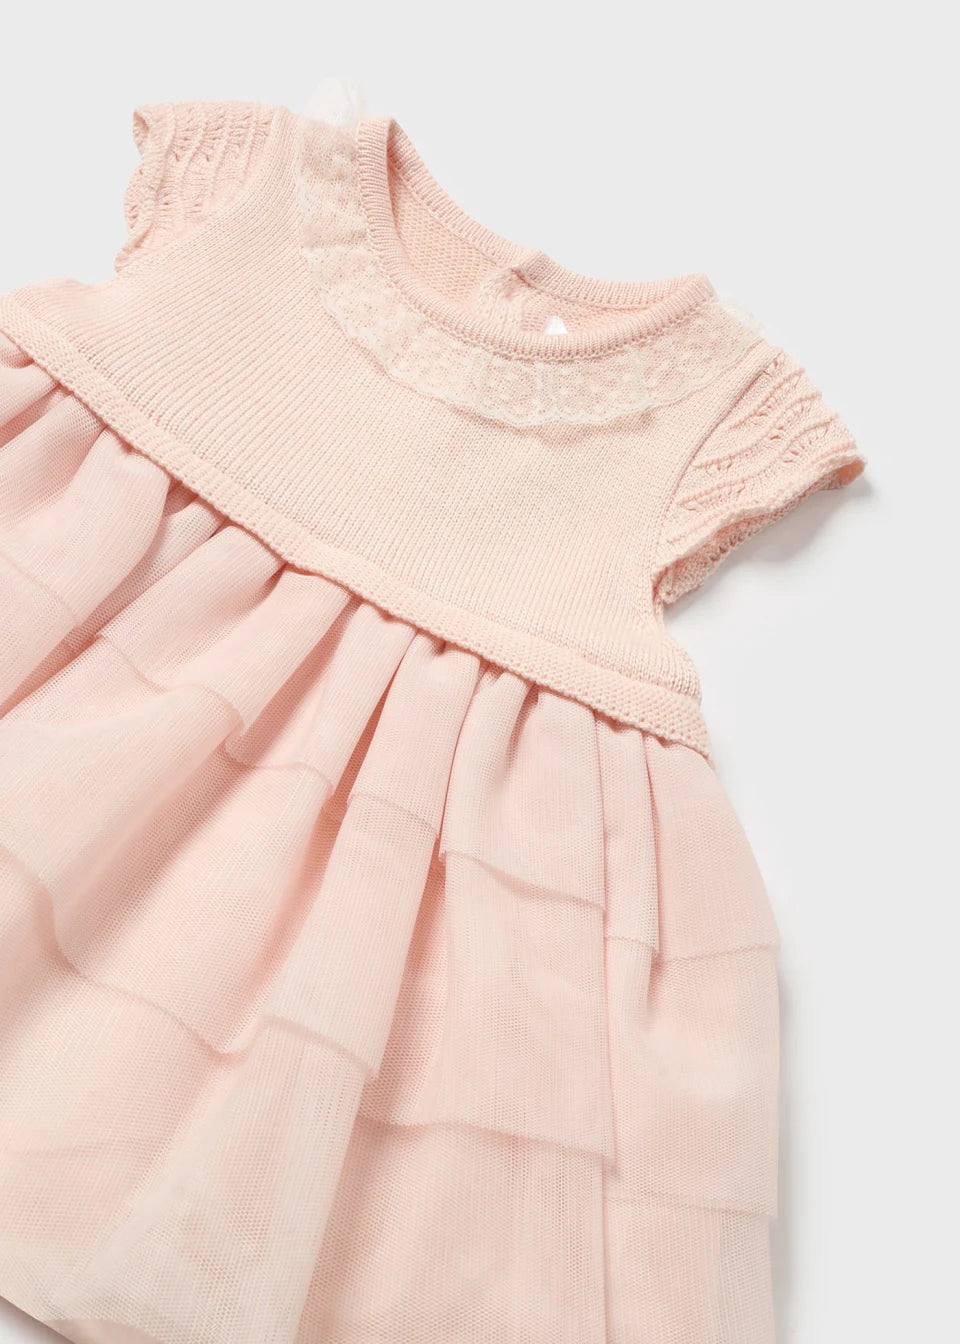 Pink dress for baby